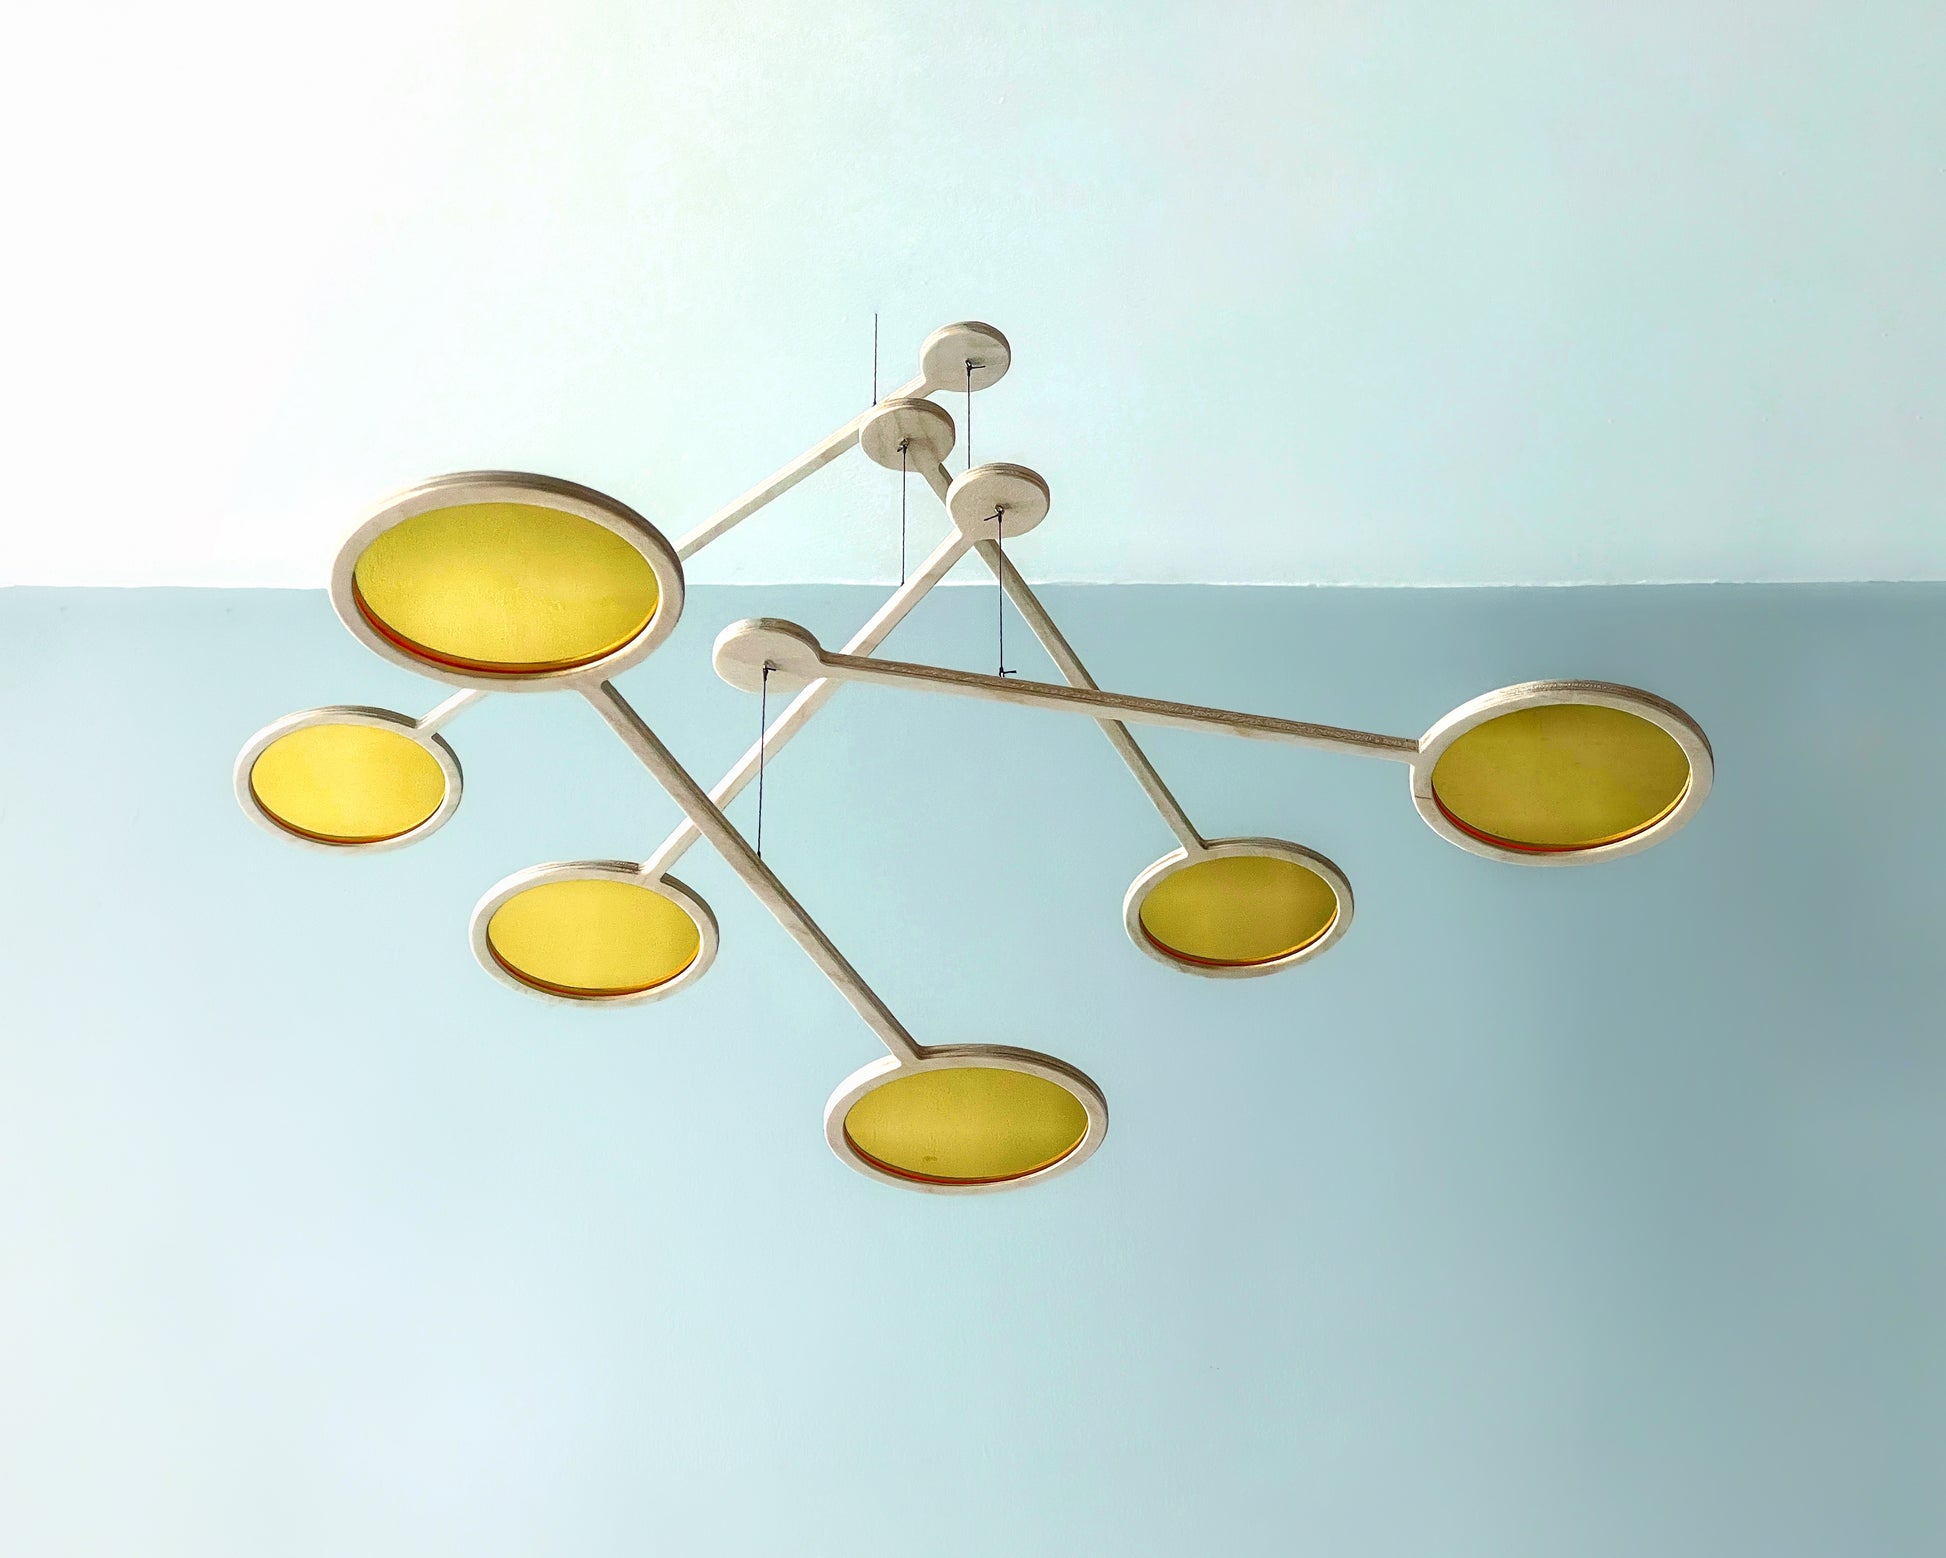 Orbit Mobile - The Illuminist - Gold Brass mirror  Mobiles Kinetic Mobile Kinetic Art  Kinetic Sculpture Crib Mobile Baby Mobile Nursery Mobile Mobile Art Mid Century Art  Mid Century modern Calder mobile mobiles for adults furniture and decor Hanging Art Mobile Art spinning mobile Modern Art Contemporary Art  Hanging mobile Calder-inspired. 